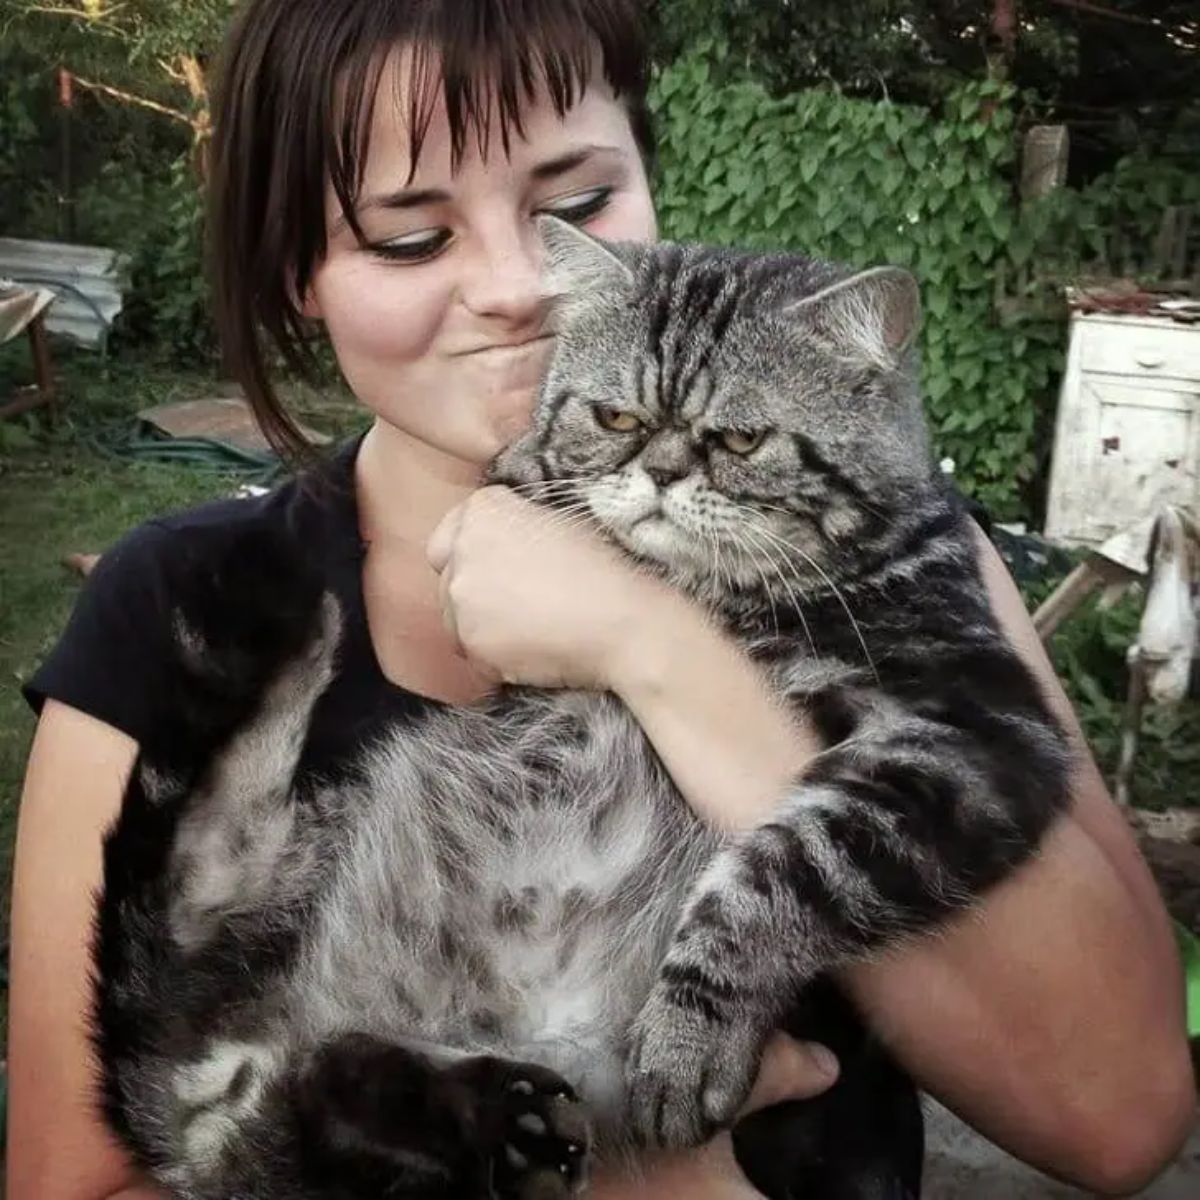 fat grey tabby cat getting hugged while looking grumpy by a grimacing woman